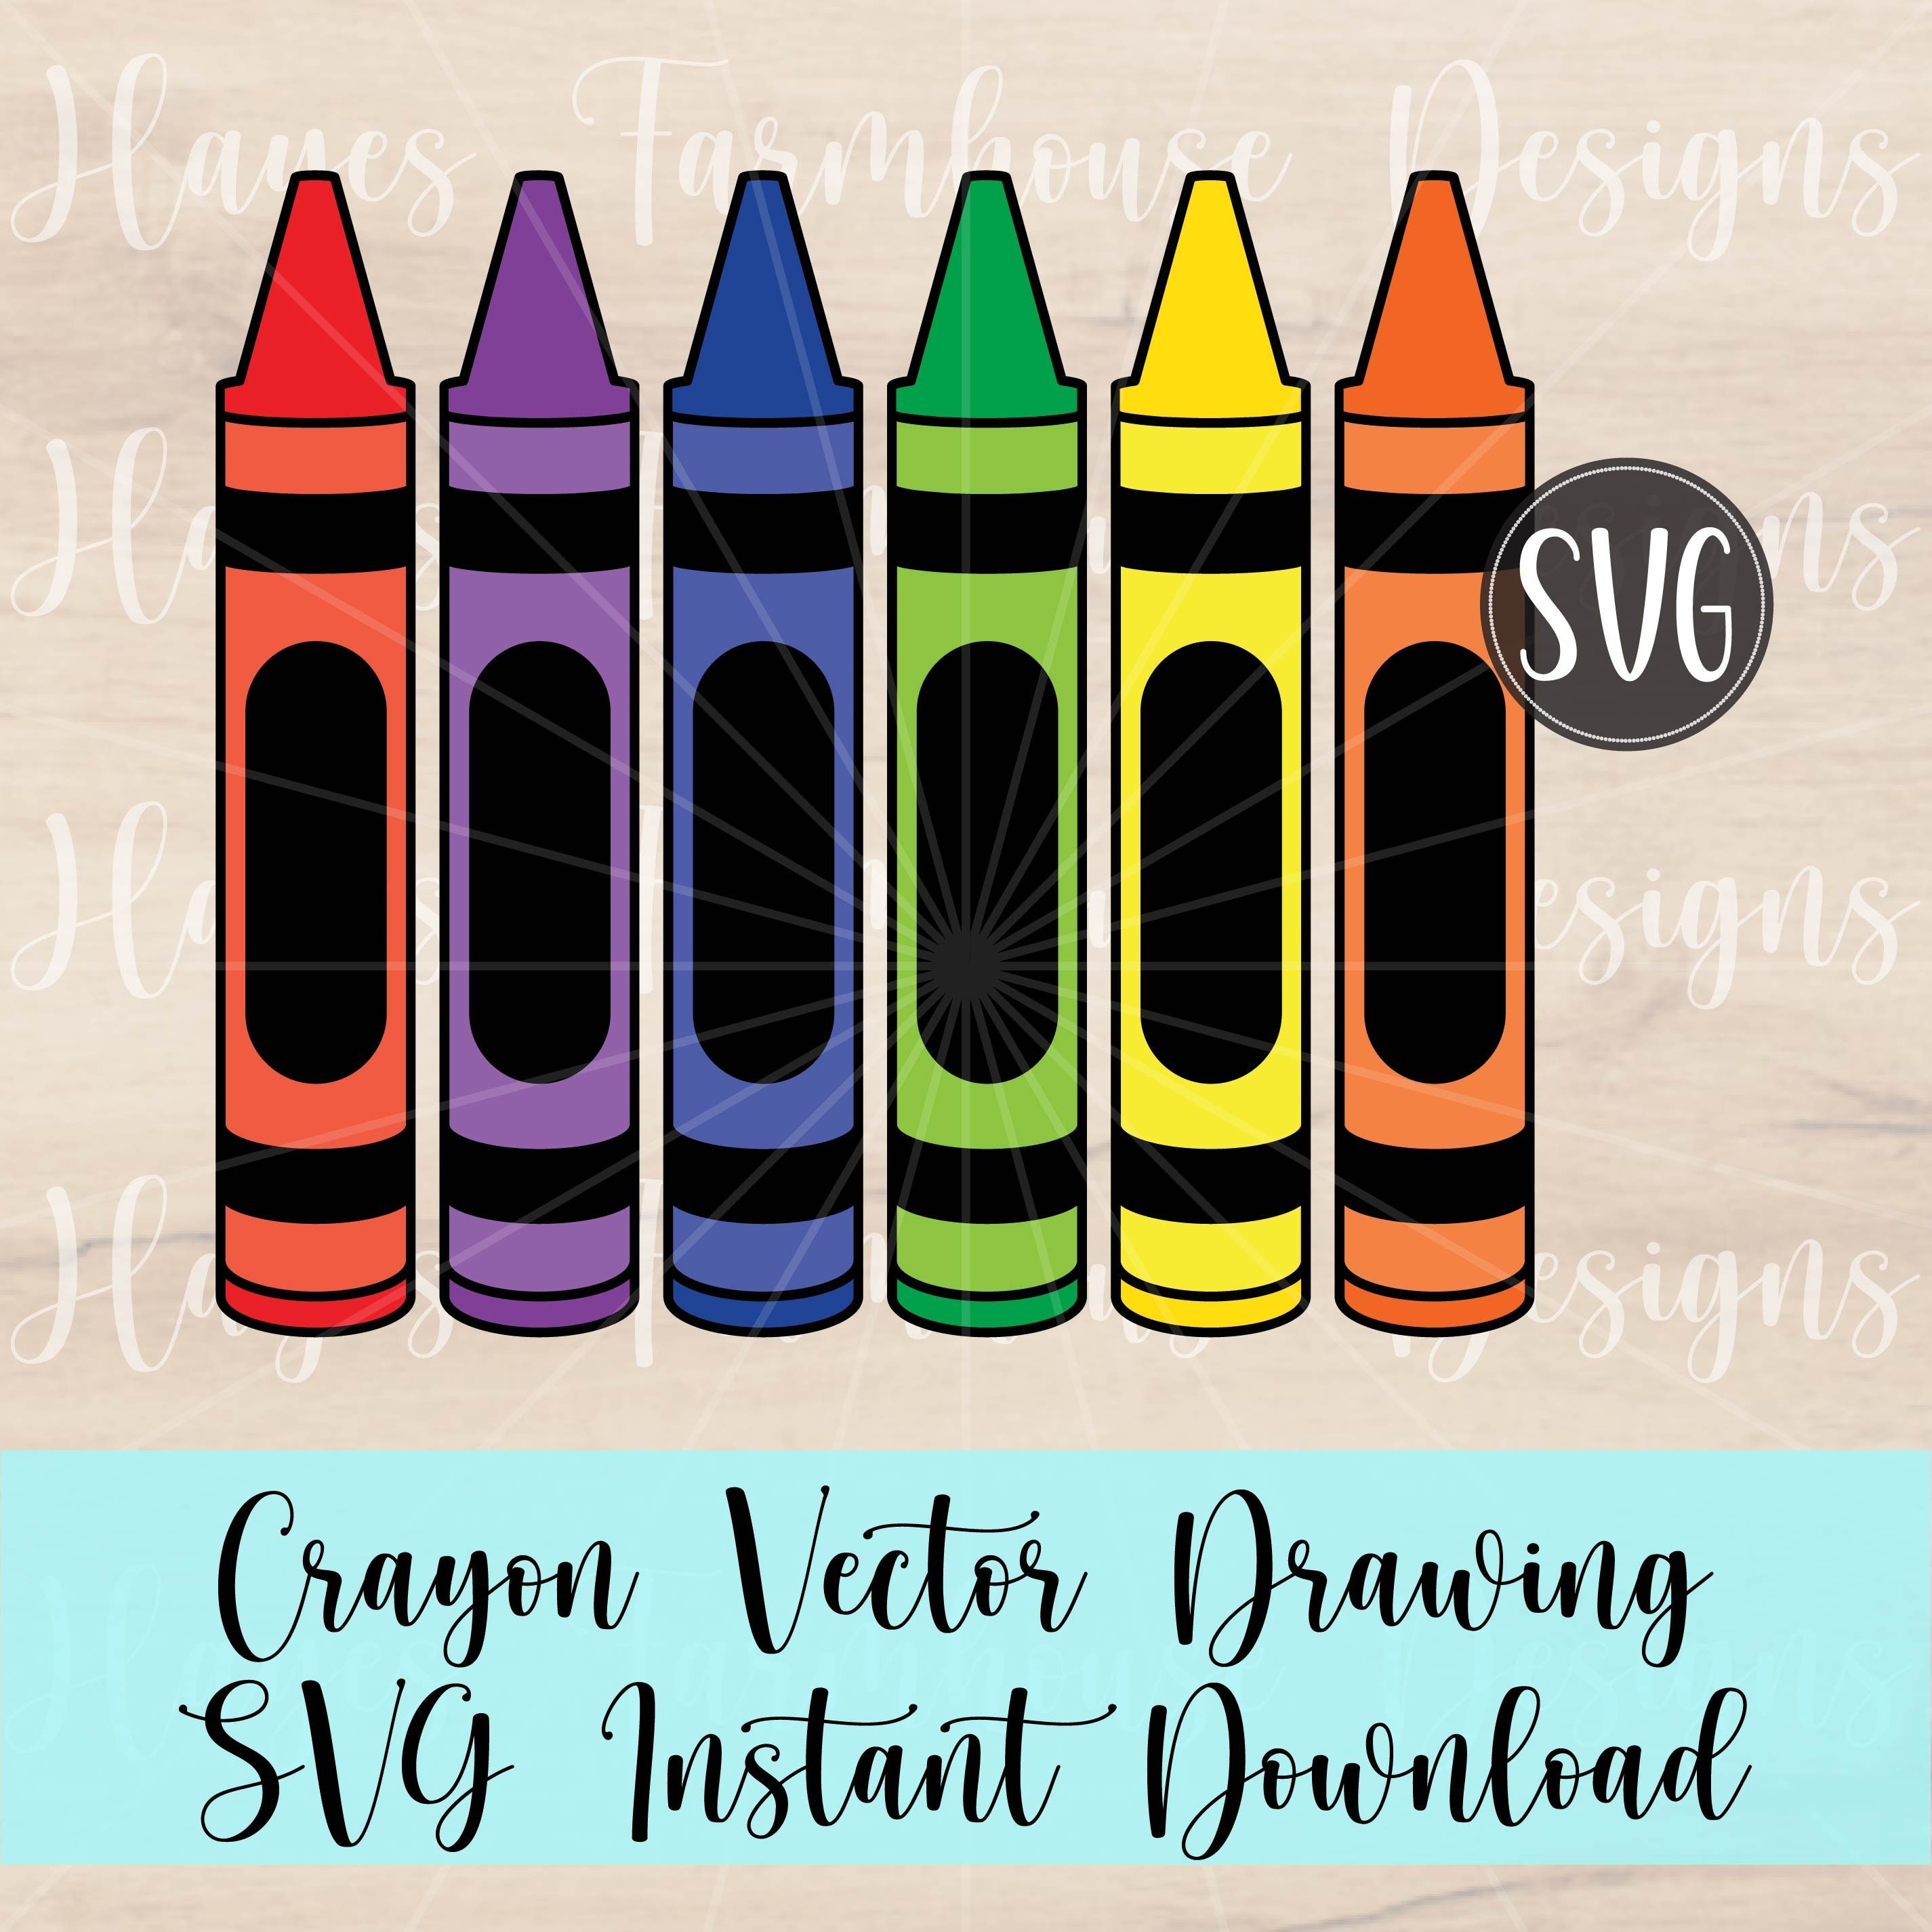 Crayon Wraps Back to School Svg Graphic by VeczSvgHouse · Creative Fabrica